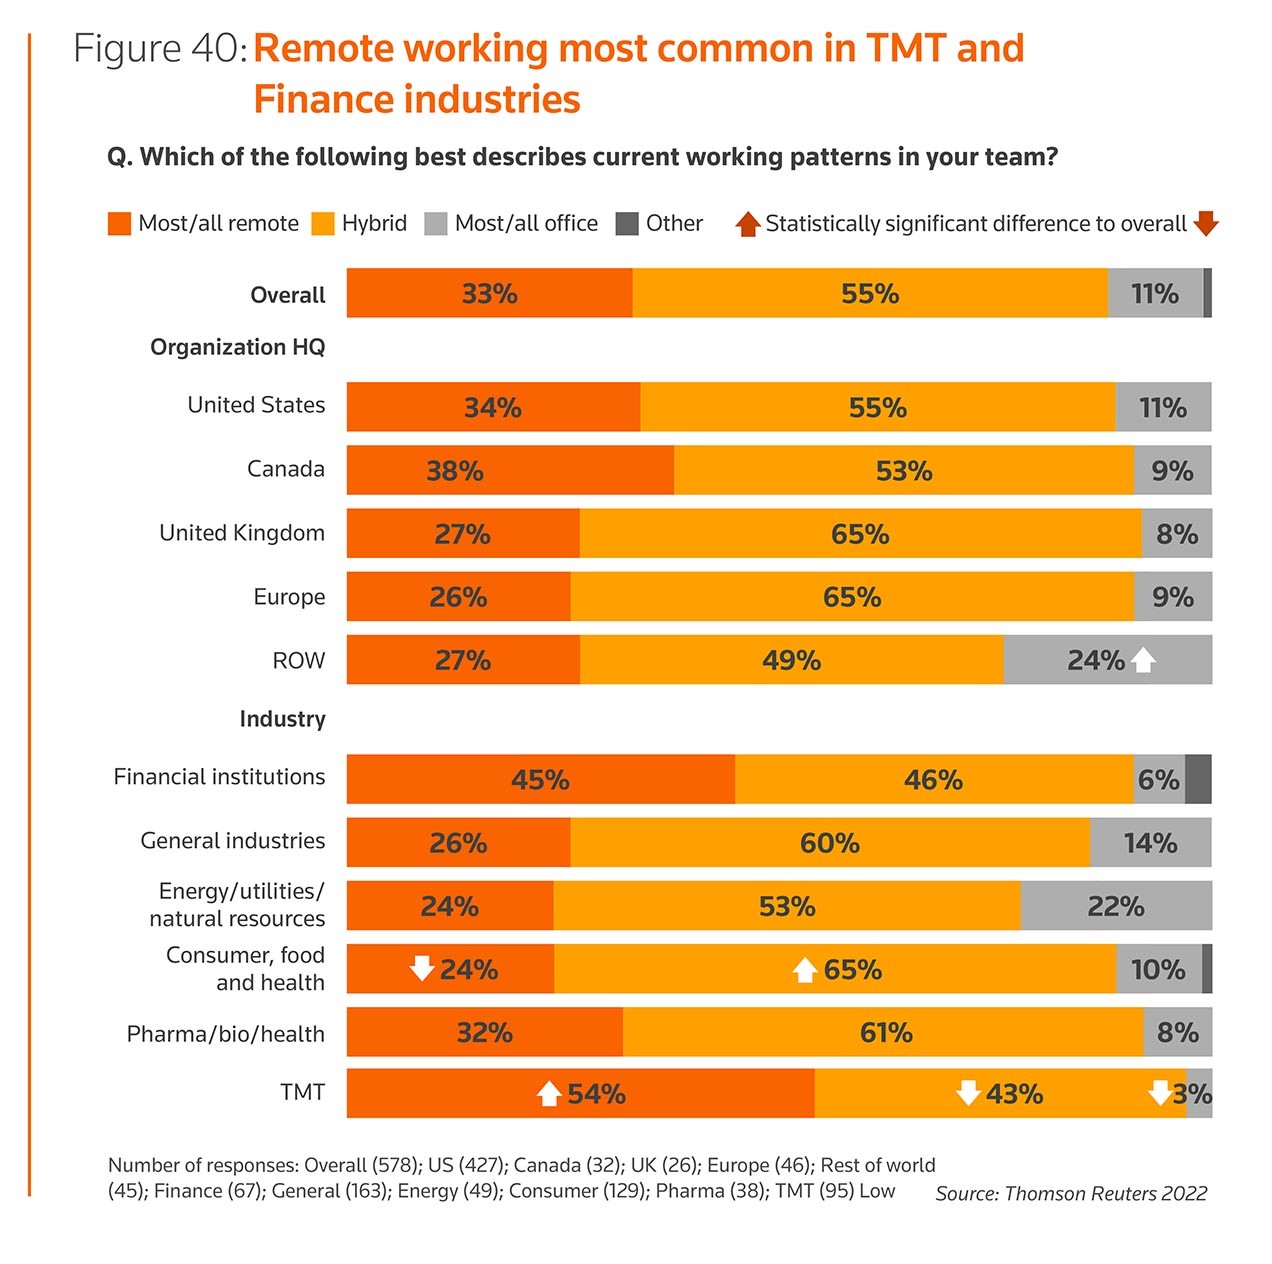 Figure 40: Remote working most common in TMT and Finance industries